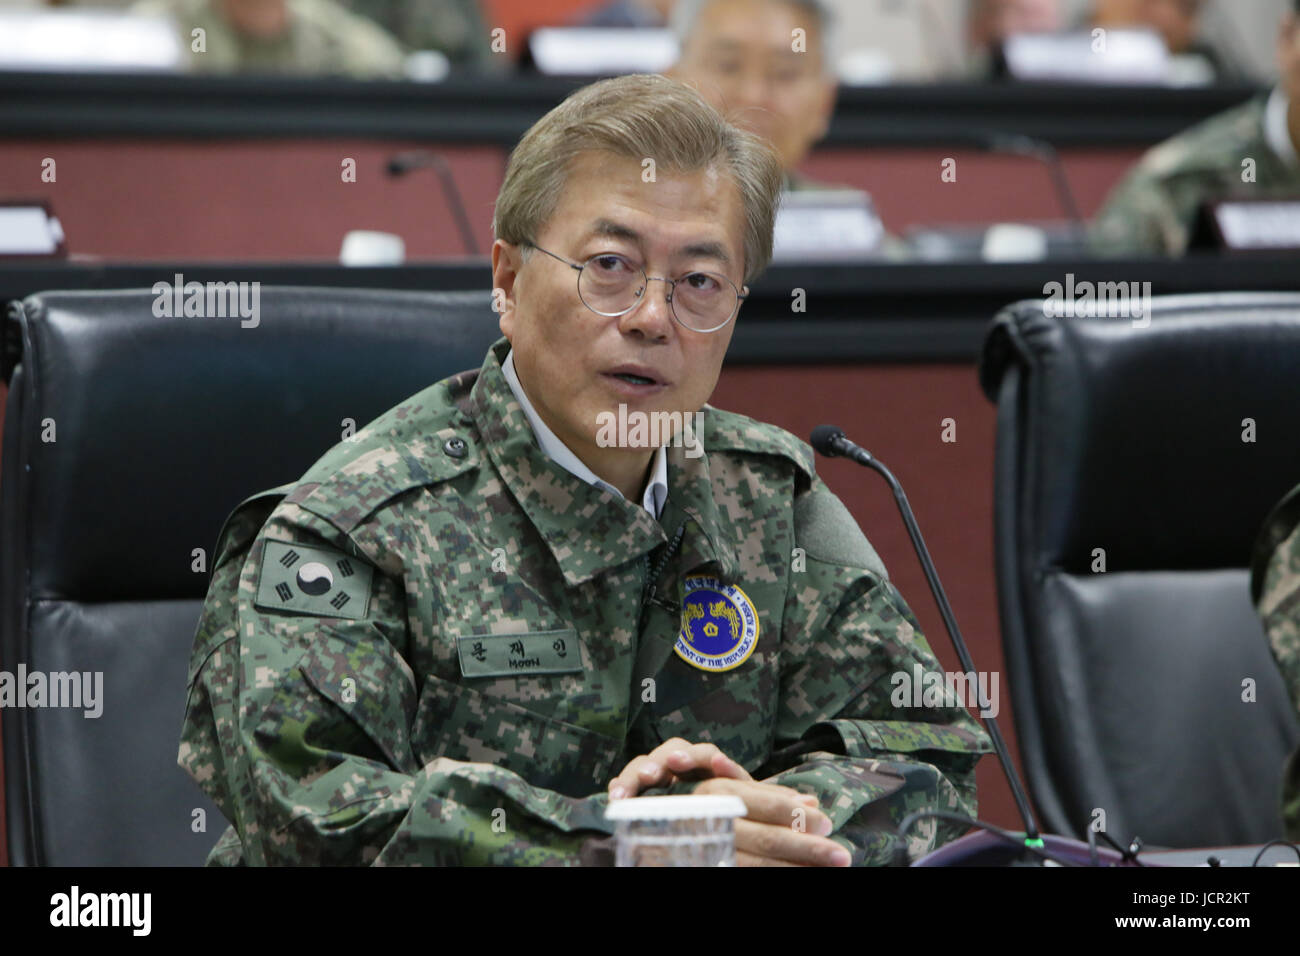 South Korean President Moon Jae-in speaks during his first official visit to U.S. Army Garrison Yongsan June 13, 2017 in Seoul, South Korea. Stock Photo